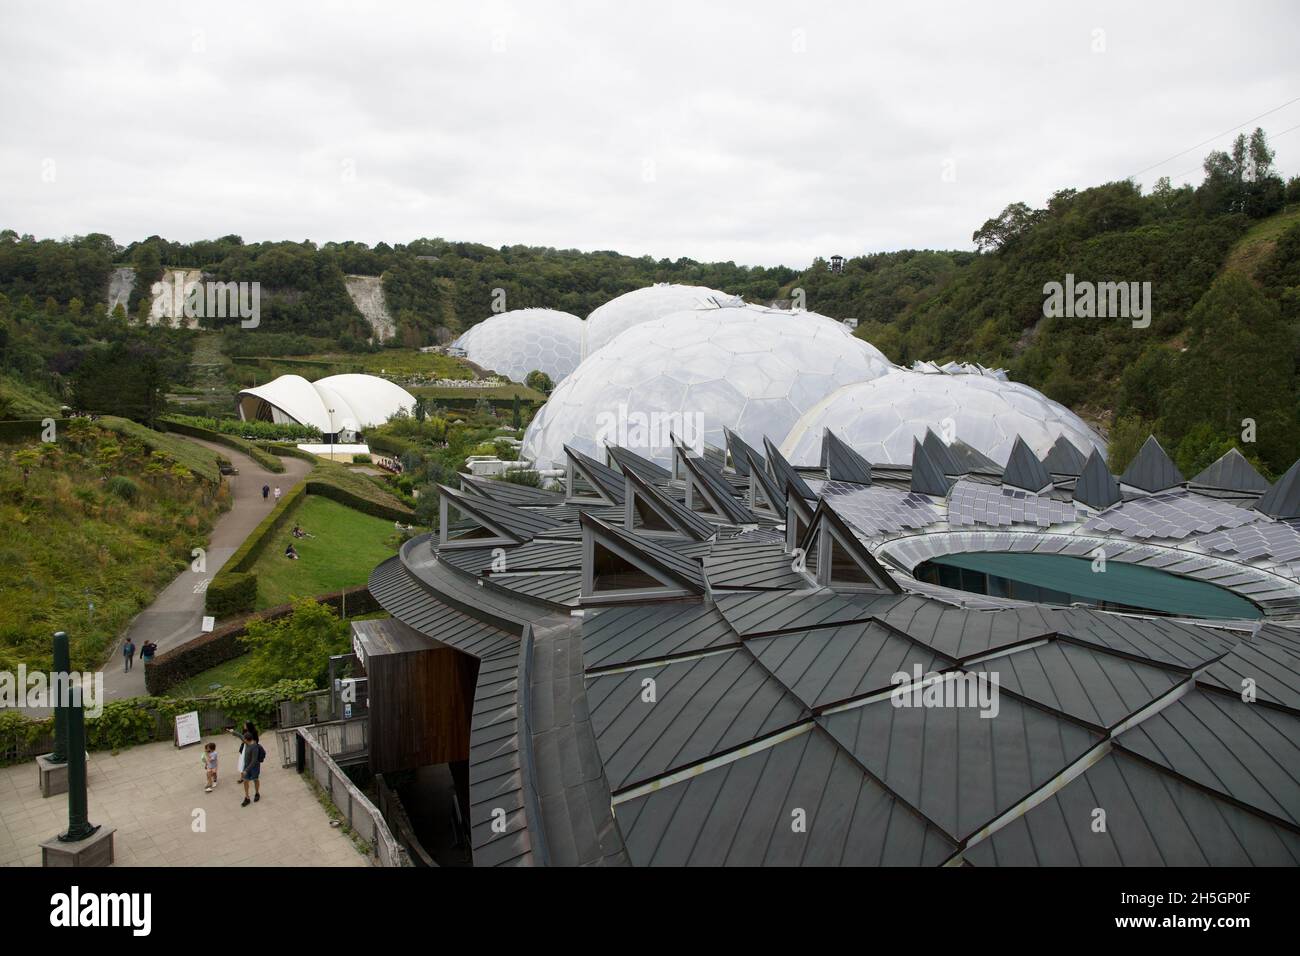 The Eden Project Domes and discovery building Stock Photo